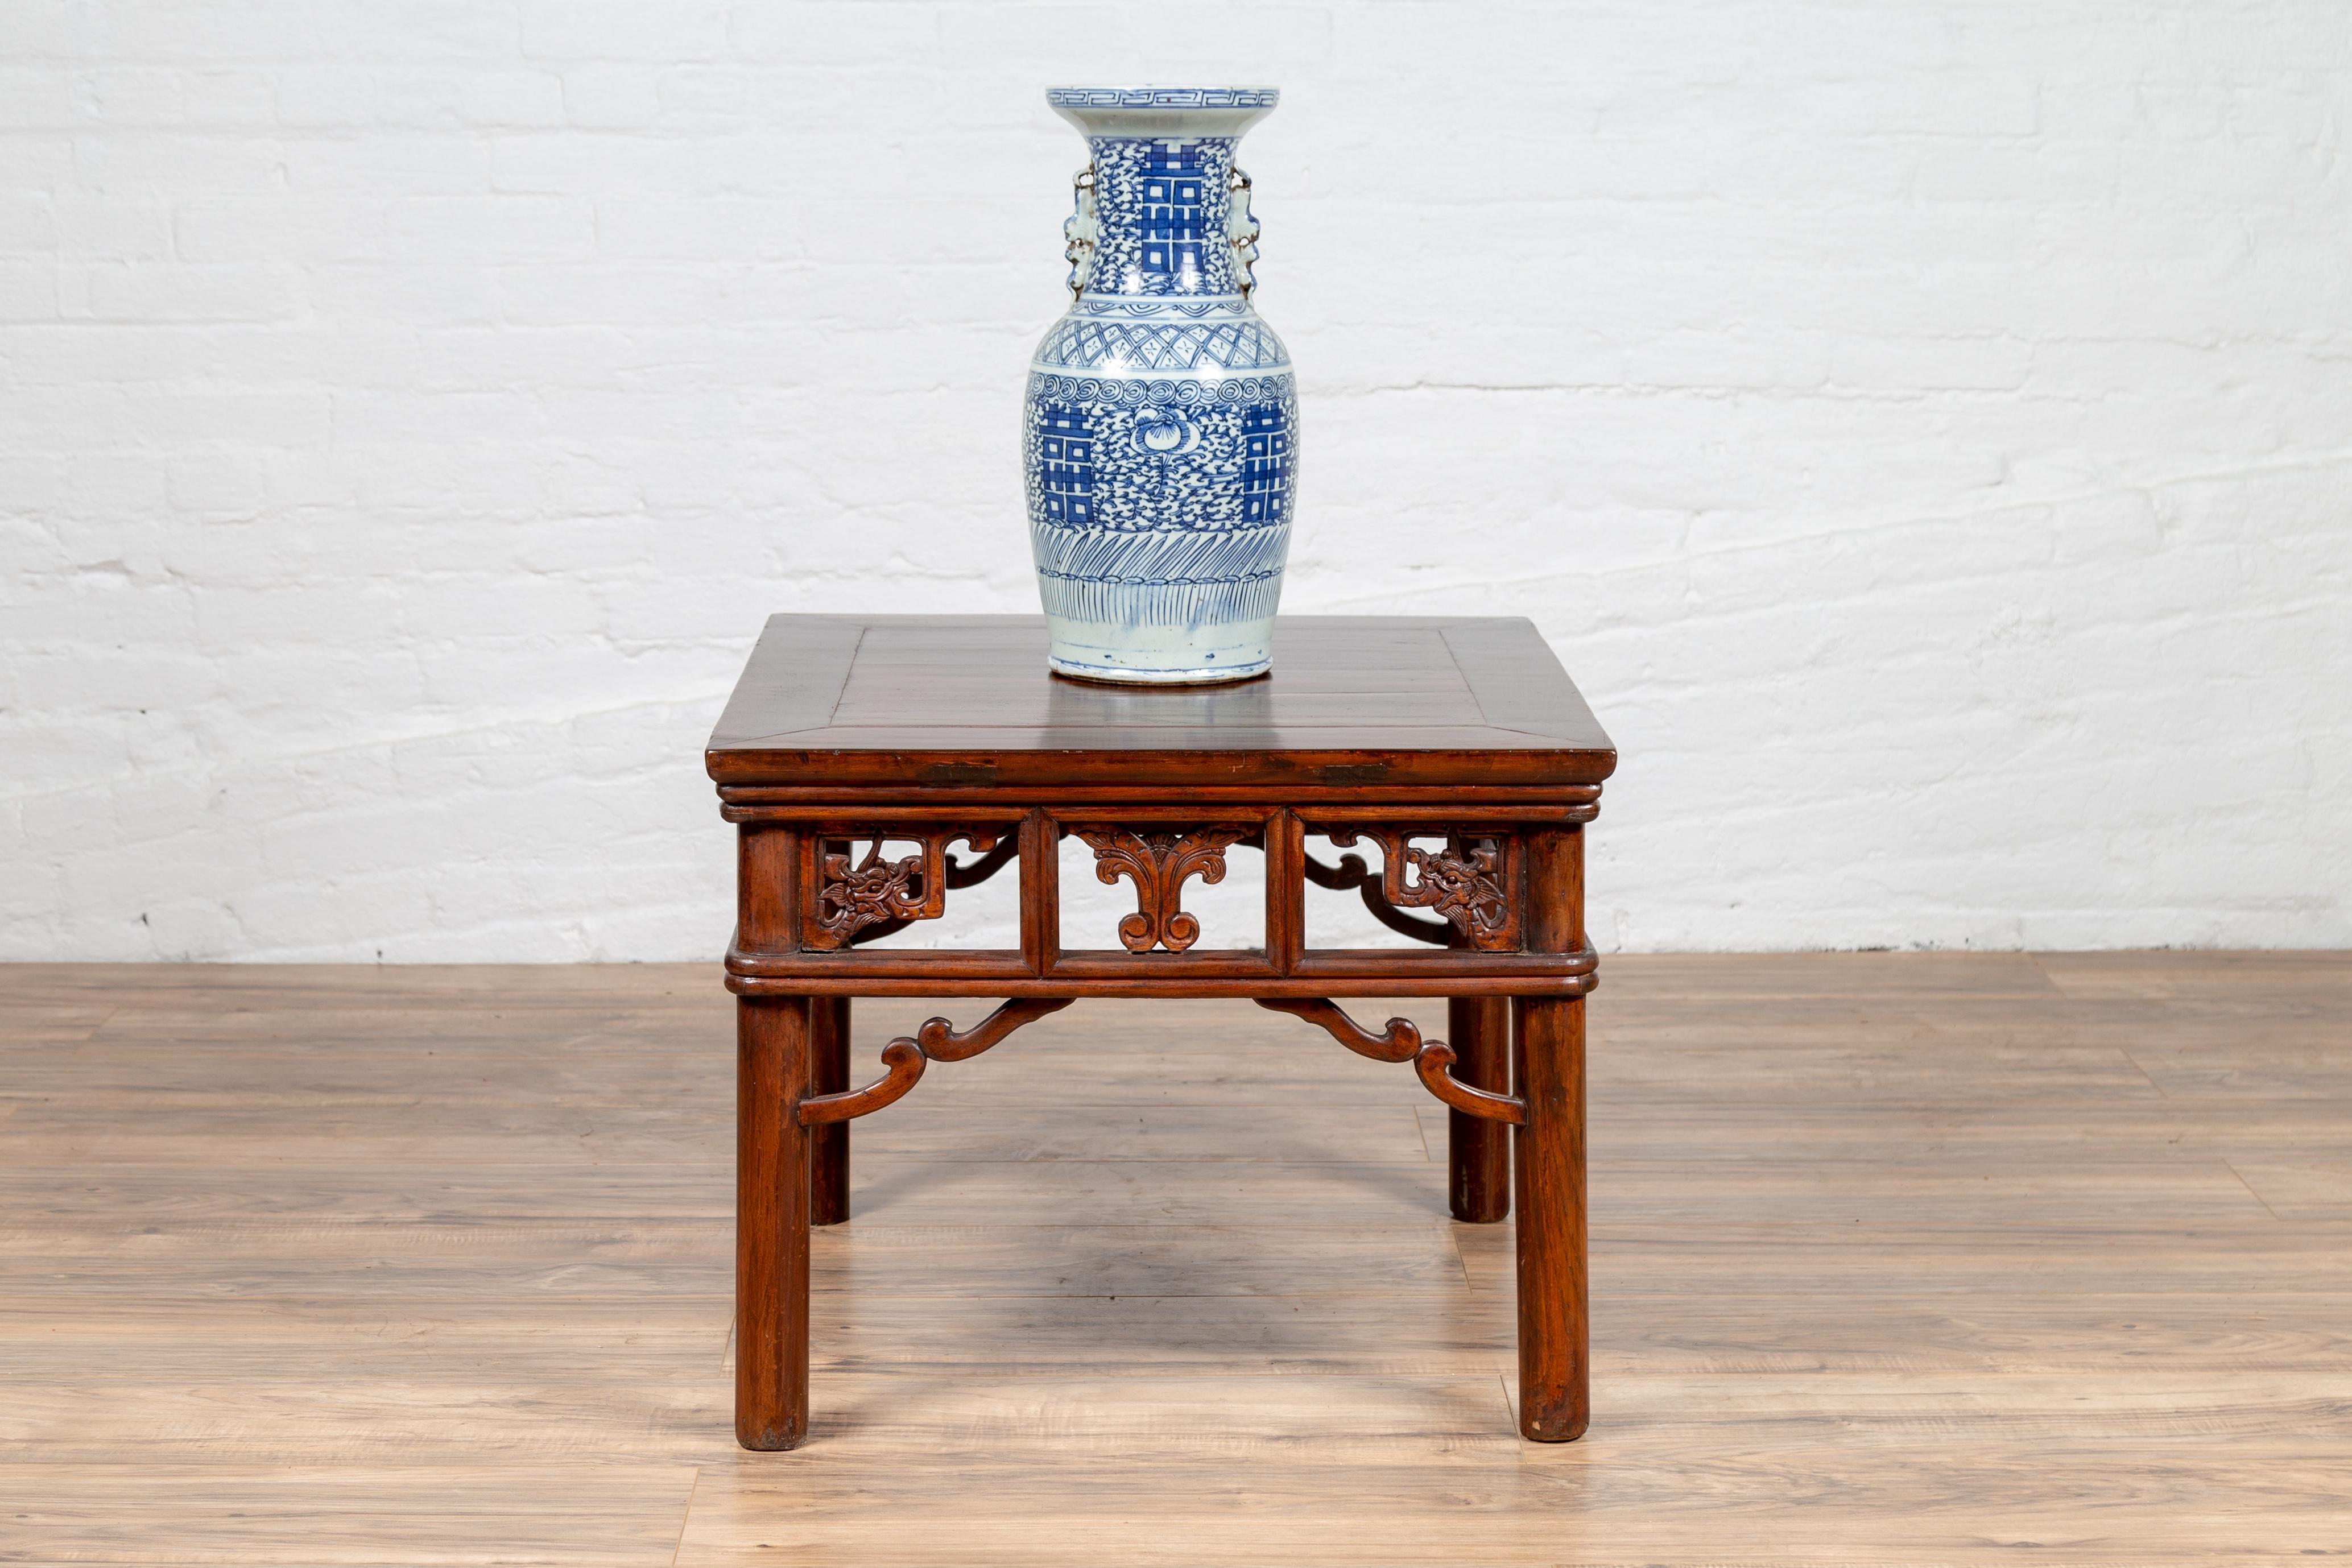 An antique Chinese Qing Dynasty period side table from the 19th century, with open fretwork design, dark wood patina and cylindrical legs. This exquisite Chinese side table features a rectangular planked top, sitting above a graceful apron. The open